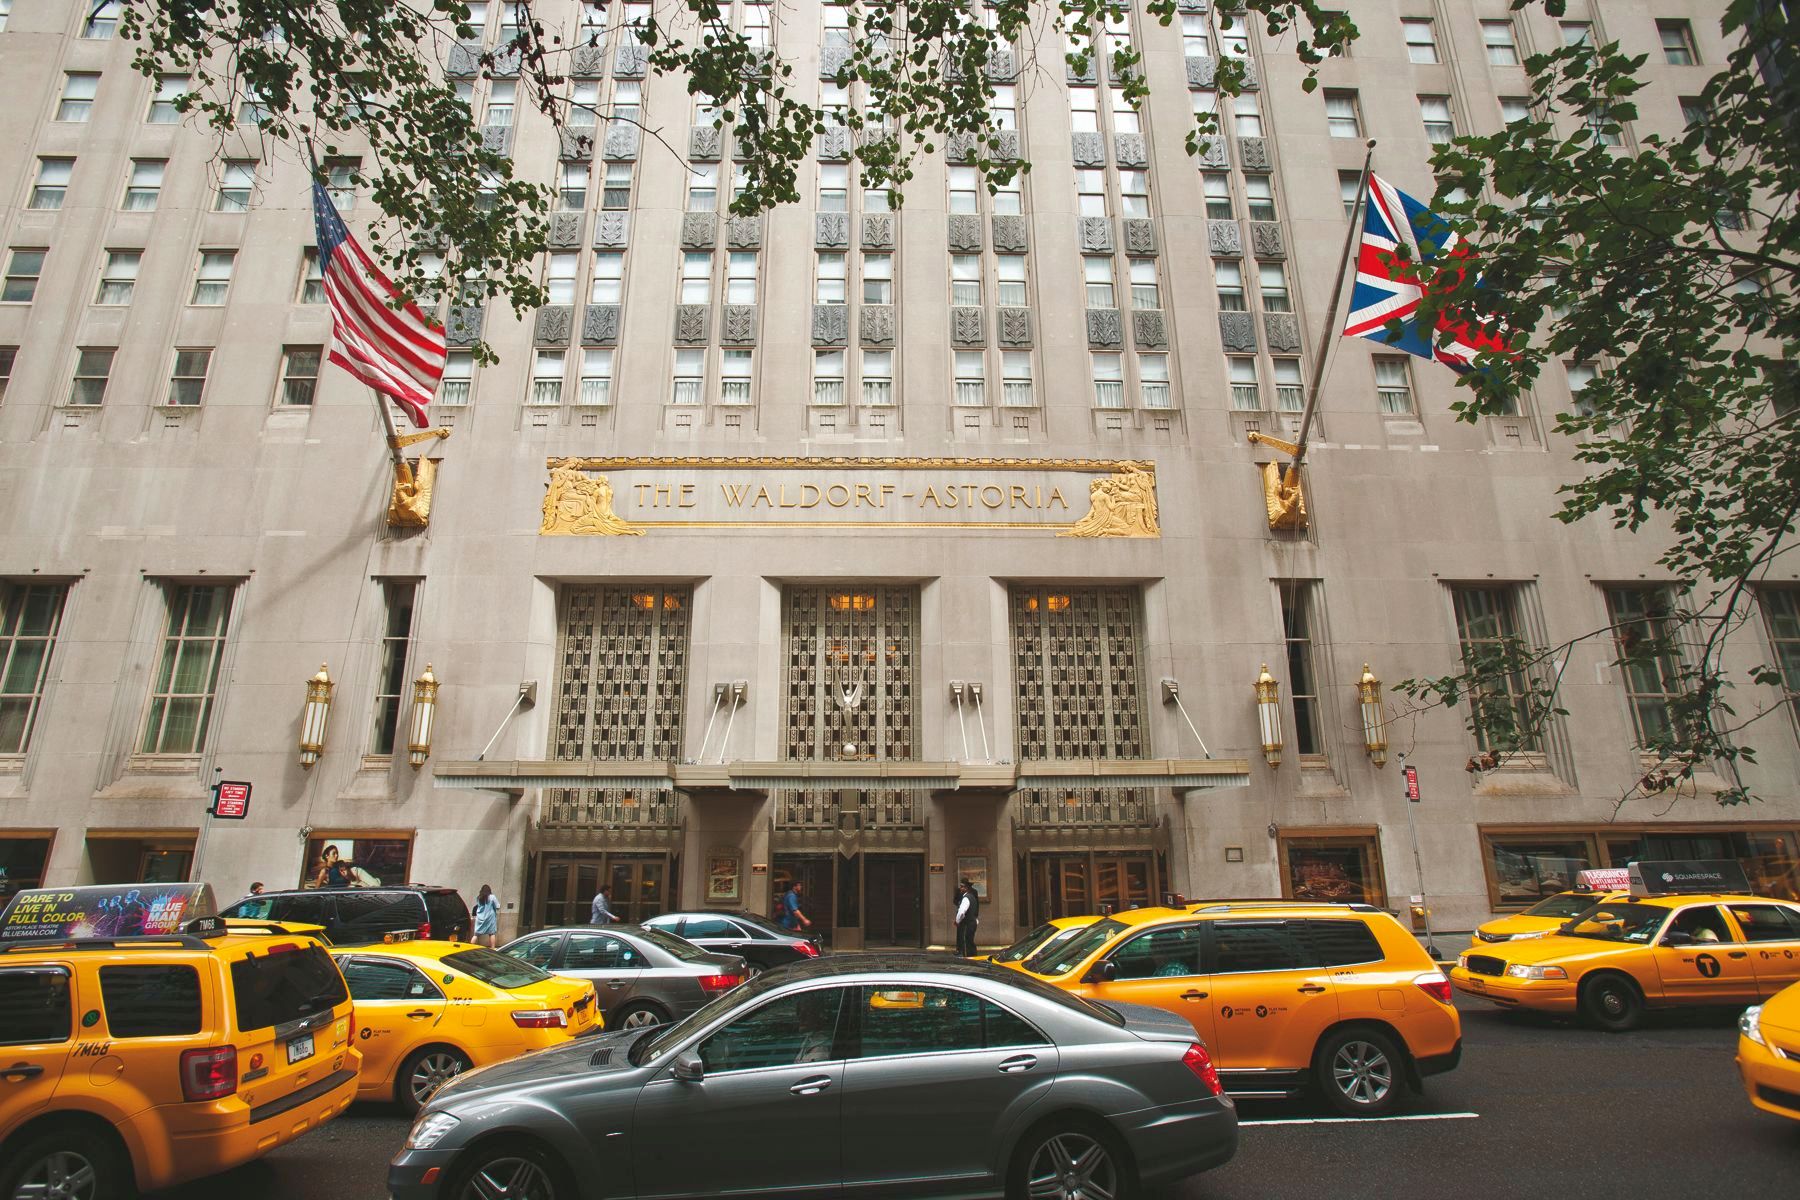 No need to check-in at Waldorf Astoria, you could just move in